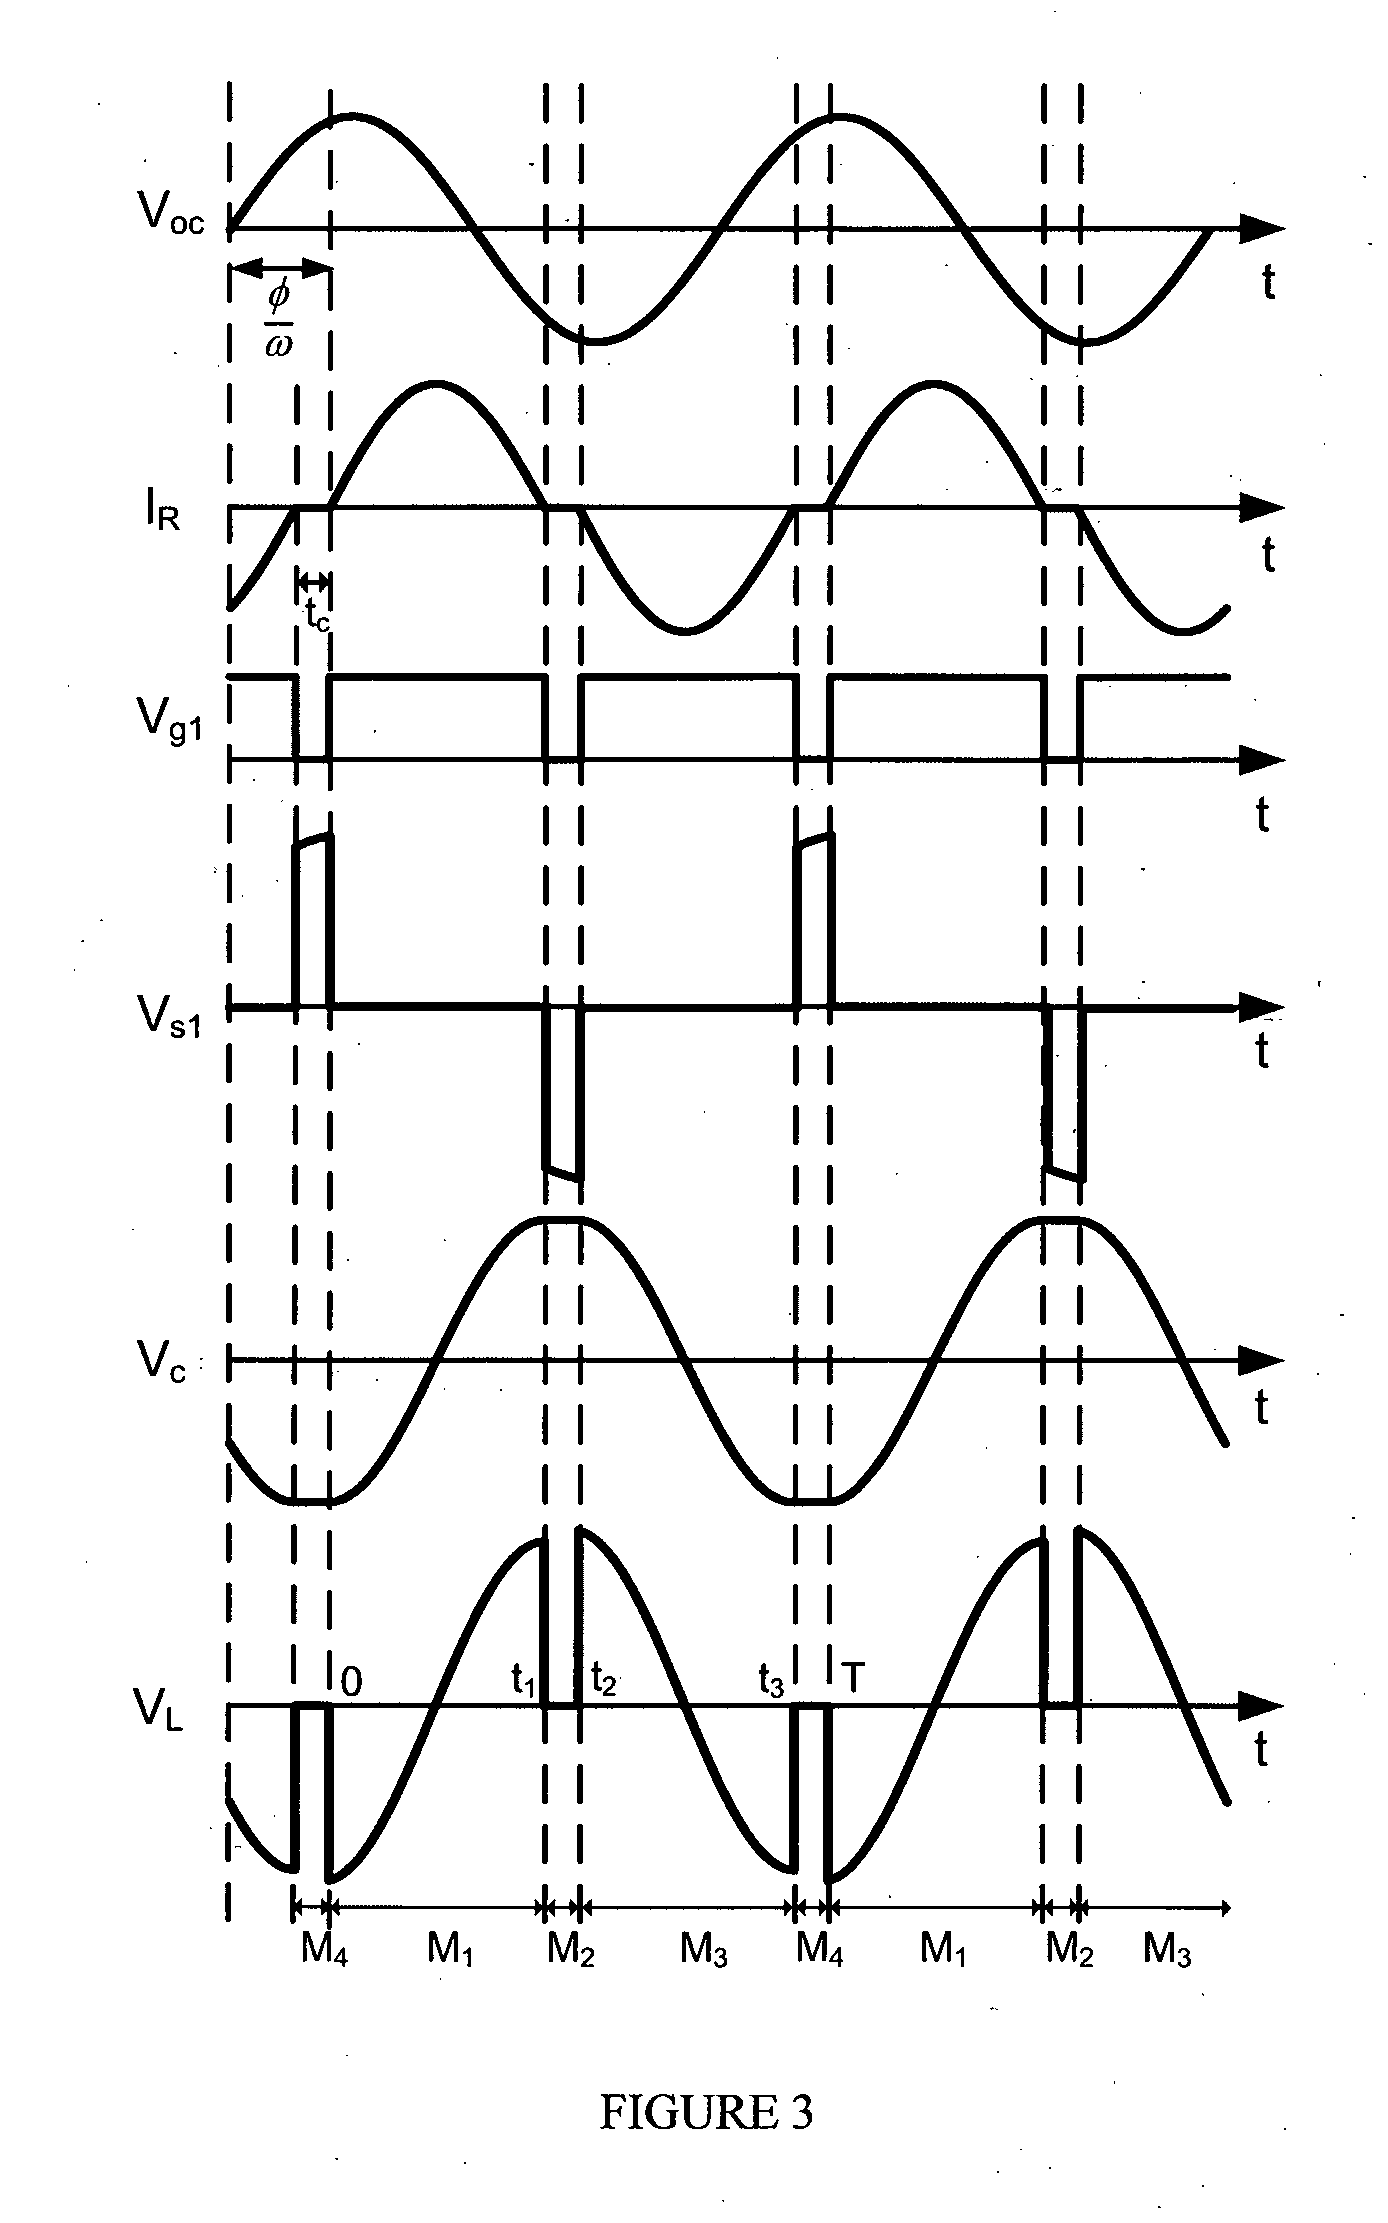 Inductively controlled series resonant ac power transfer